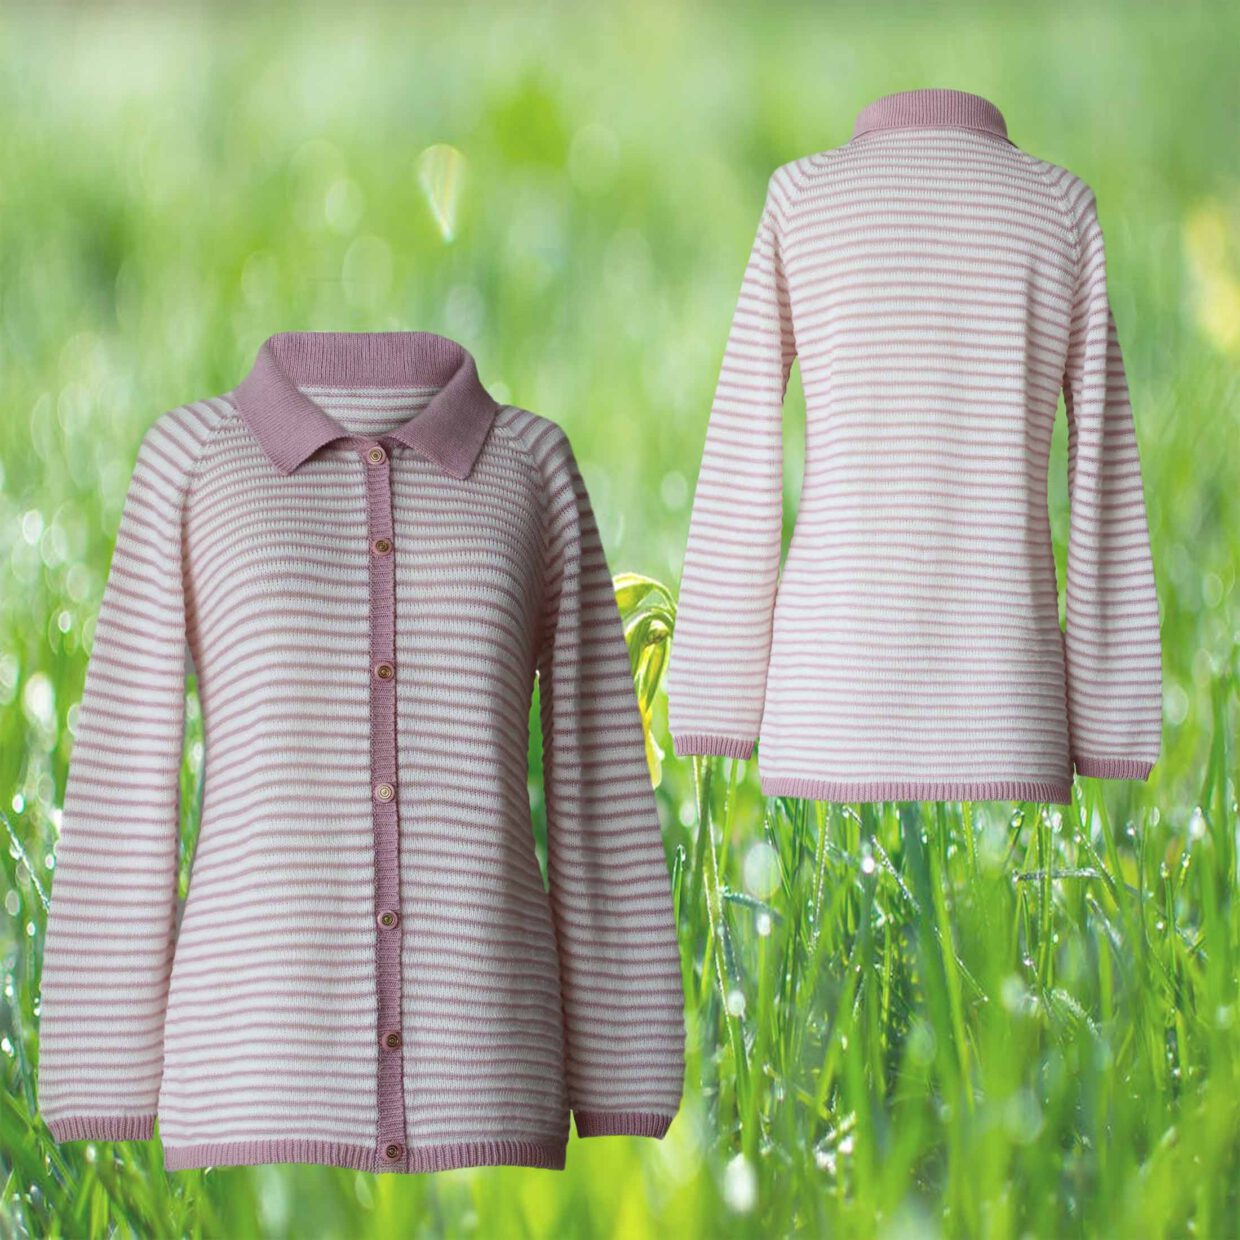 PFL - knitwear Women's cardigan with relief knitted stripes button closure. baby alpaca/tanguis cotton blend. spring summer fall cardigan.